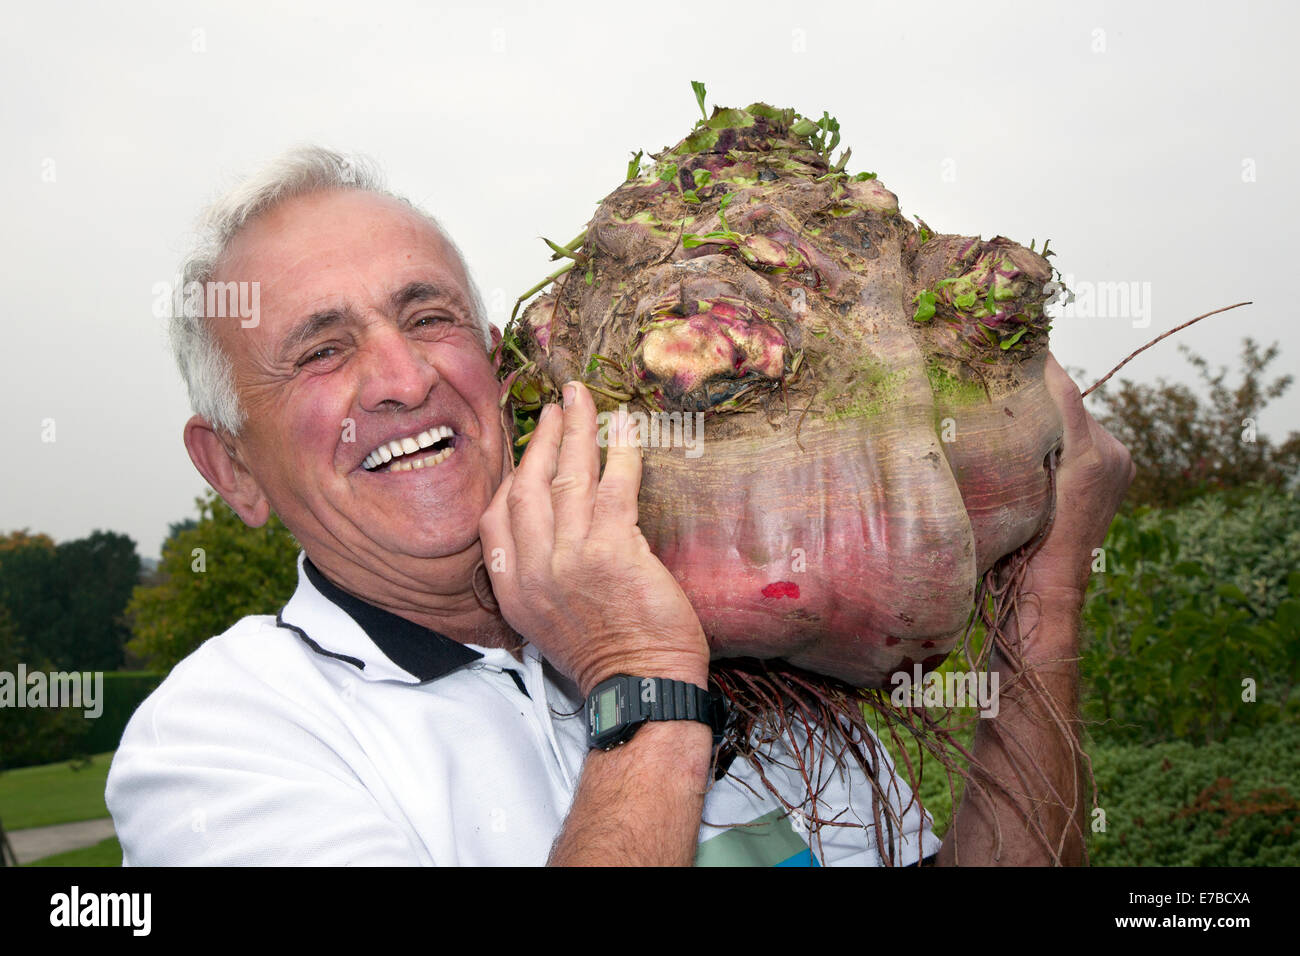 Harrogate, Yorkshire, UK. 12th September, 2014.  The Heaviest Beetroot at the Harrogate Autumn Show has been awarded to Ian Neale at 21lb 6oz winner at the Harrogate Annual Autumn Flower Show, where attractions include the giant vegetable competition, the show being ranked as one of Britain's top three gardening events. Stock Photo